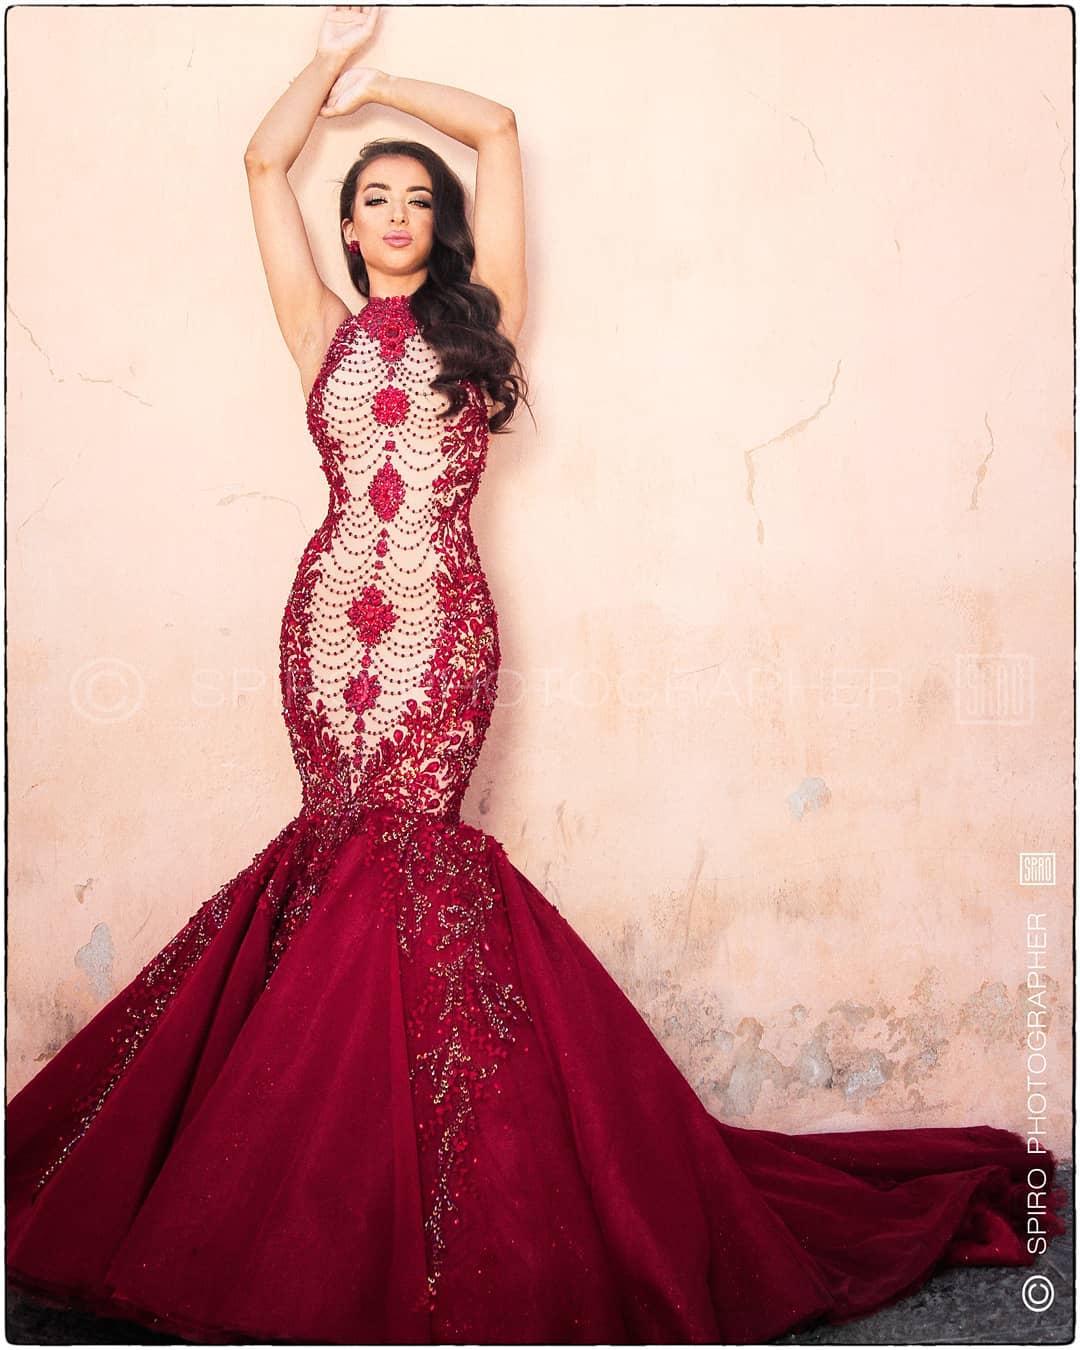 Gorgeous, ellegant, 
Ashleigh @ashleighwild_ 
@missglobalengland_ 
Wearing only the very finest in evening gowns from the renowned, 
Leo Almodal @leoalmodal 
Photographed in Oaxaca city, 
for @missglobalofficial 
copyright
@spiro_photographer 
Spiro Polichronopoulos 
Assistant: @dabeatlo 
Coach & syling: @iam_seydinaallen 
#ellegance #gorgeous #shapely #model #modeling #eveninggowns #eveninglook #red #woman #photography #photographerlife #photoshoot #missglobalofficial #oaxacafotografo #oaxaca #england #beauty #bestjobintheworld #bestjobever #luckyme